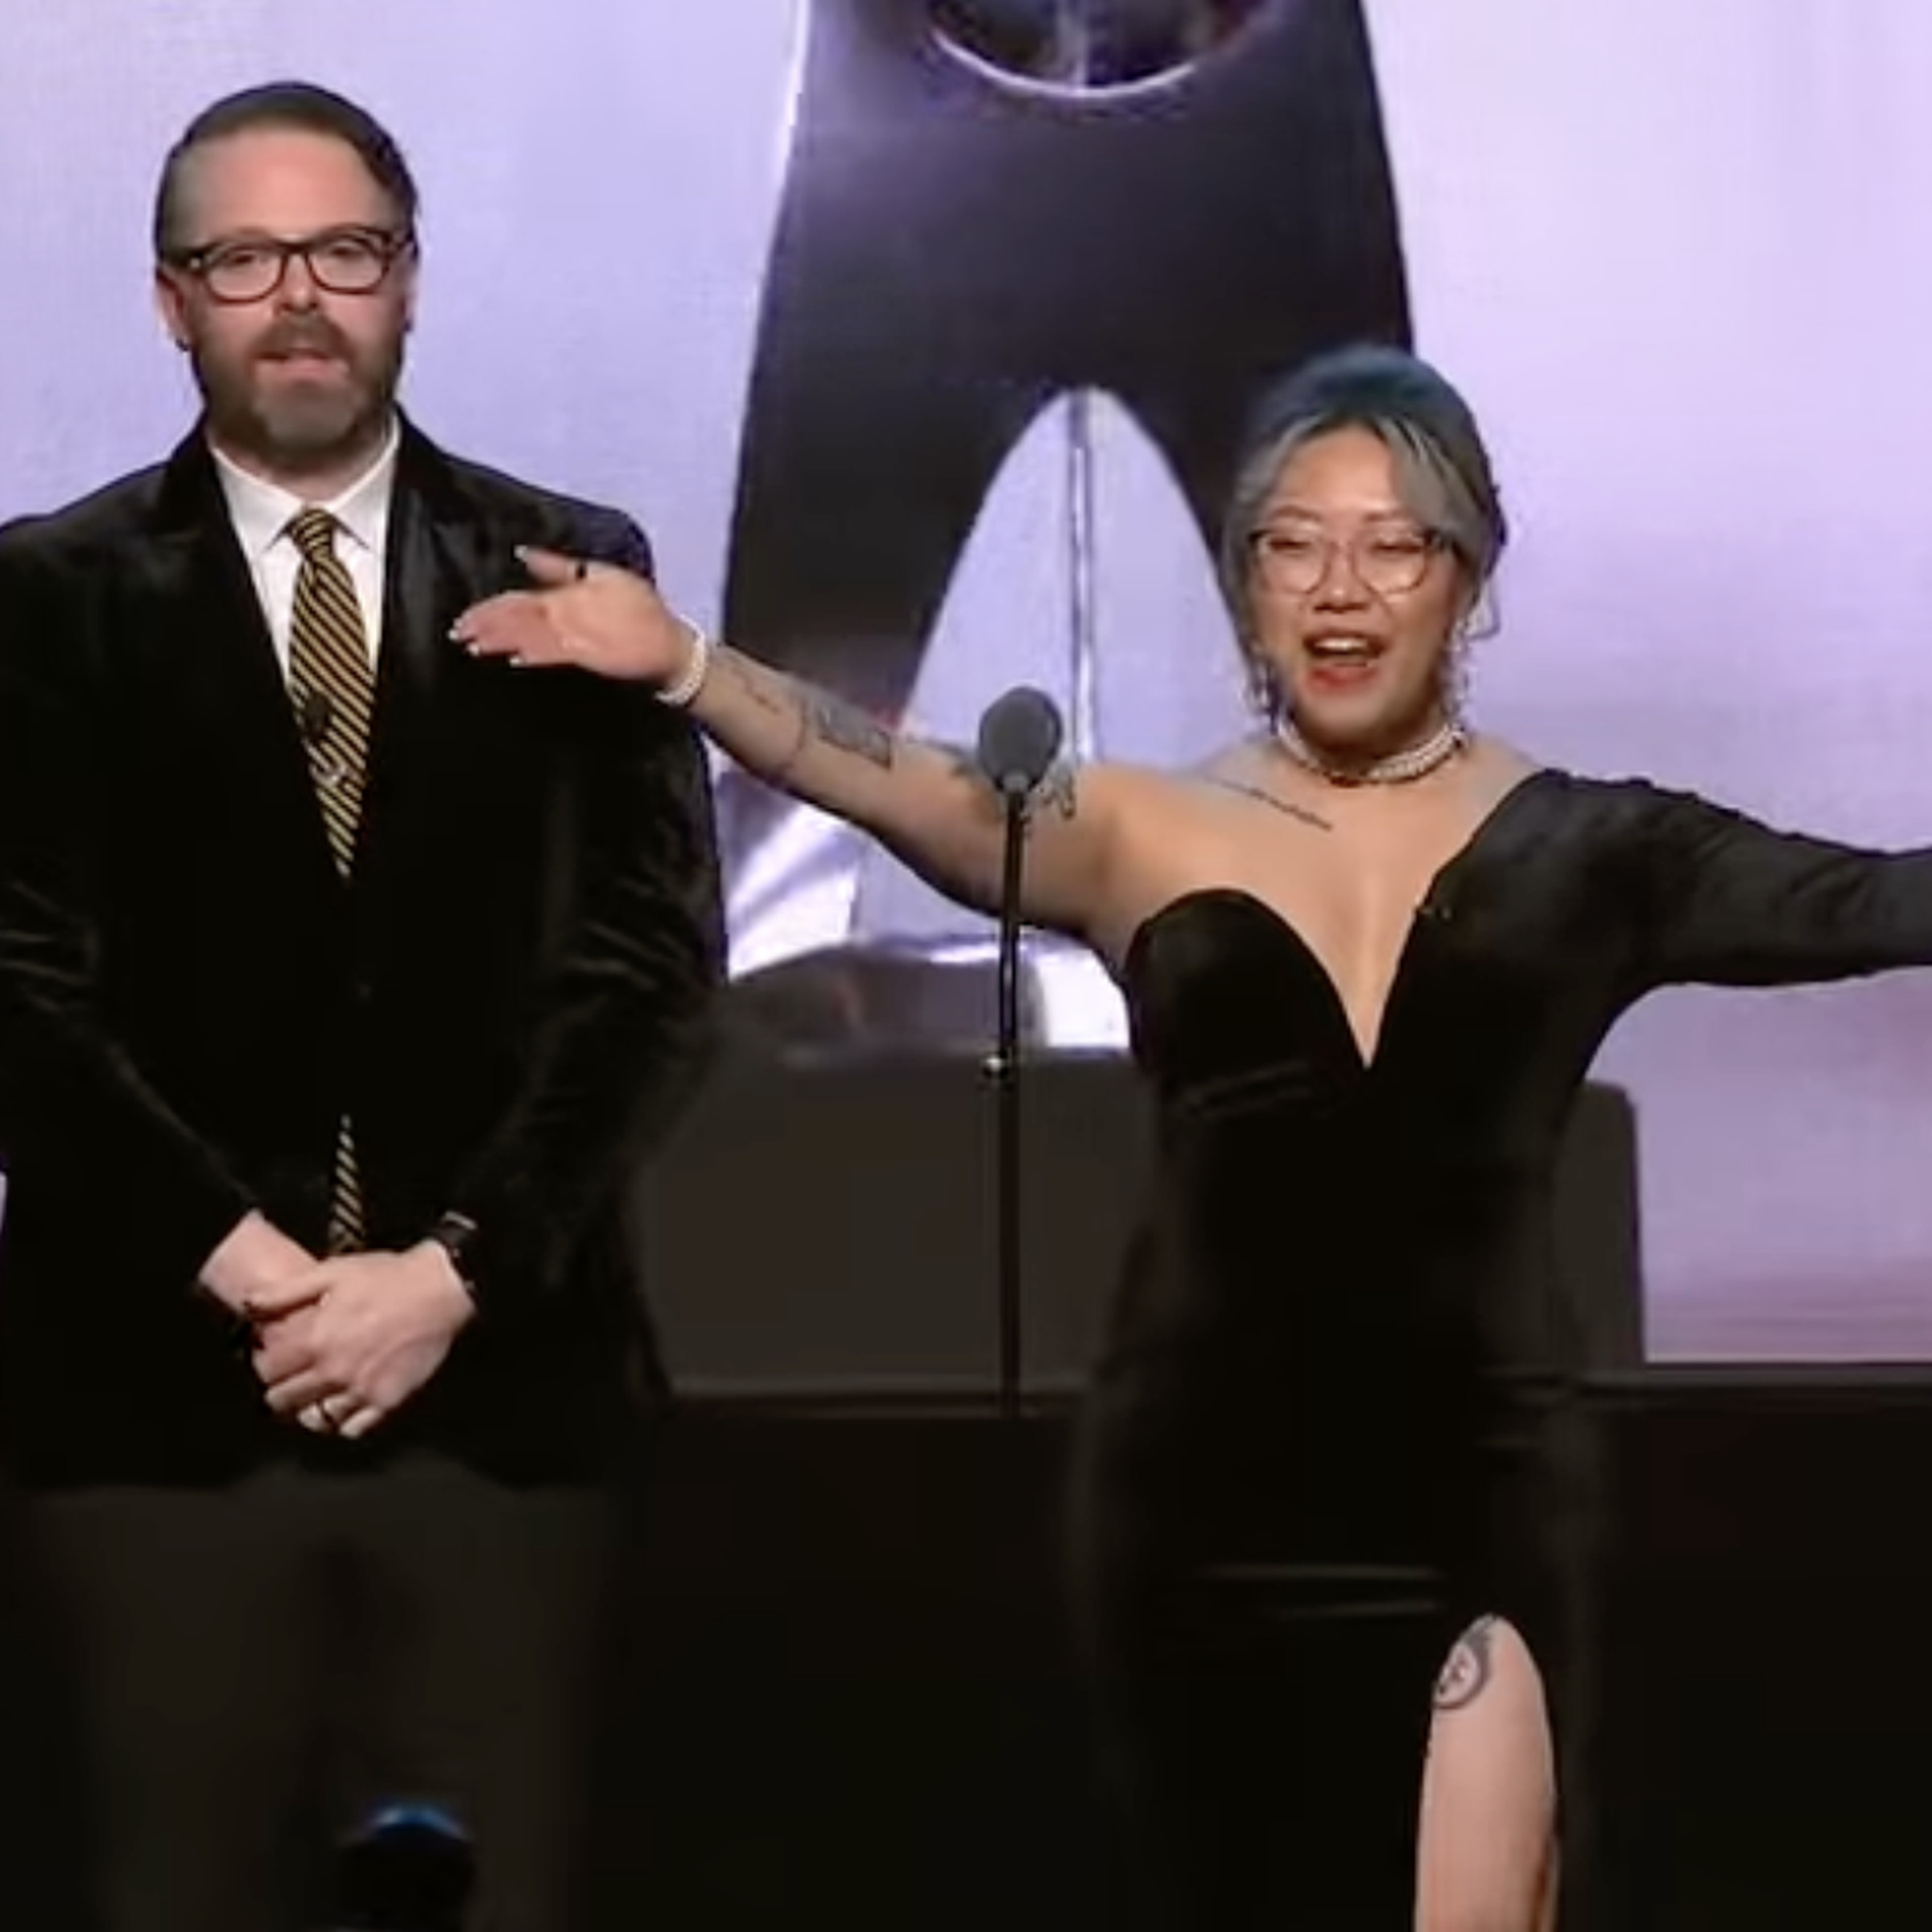 Screenshot from the 27th Annual D.I.C.E. Awards featuring the event’s two hosts Greg Miller (left) and Stella Chung (right).